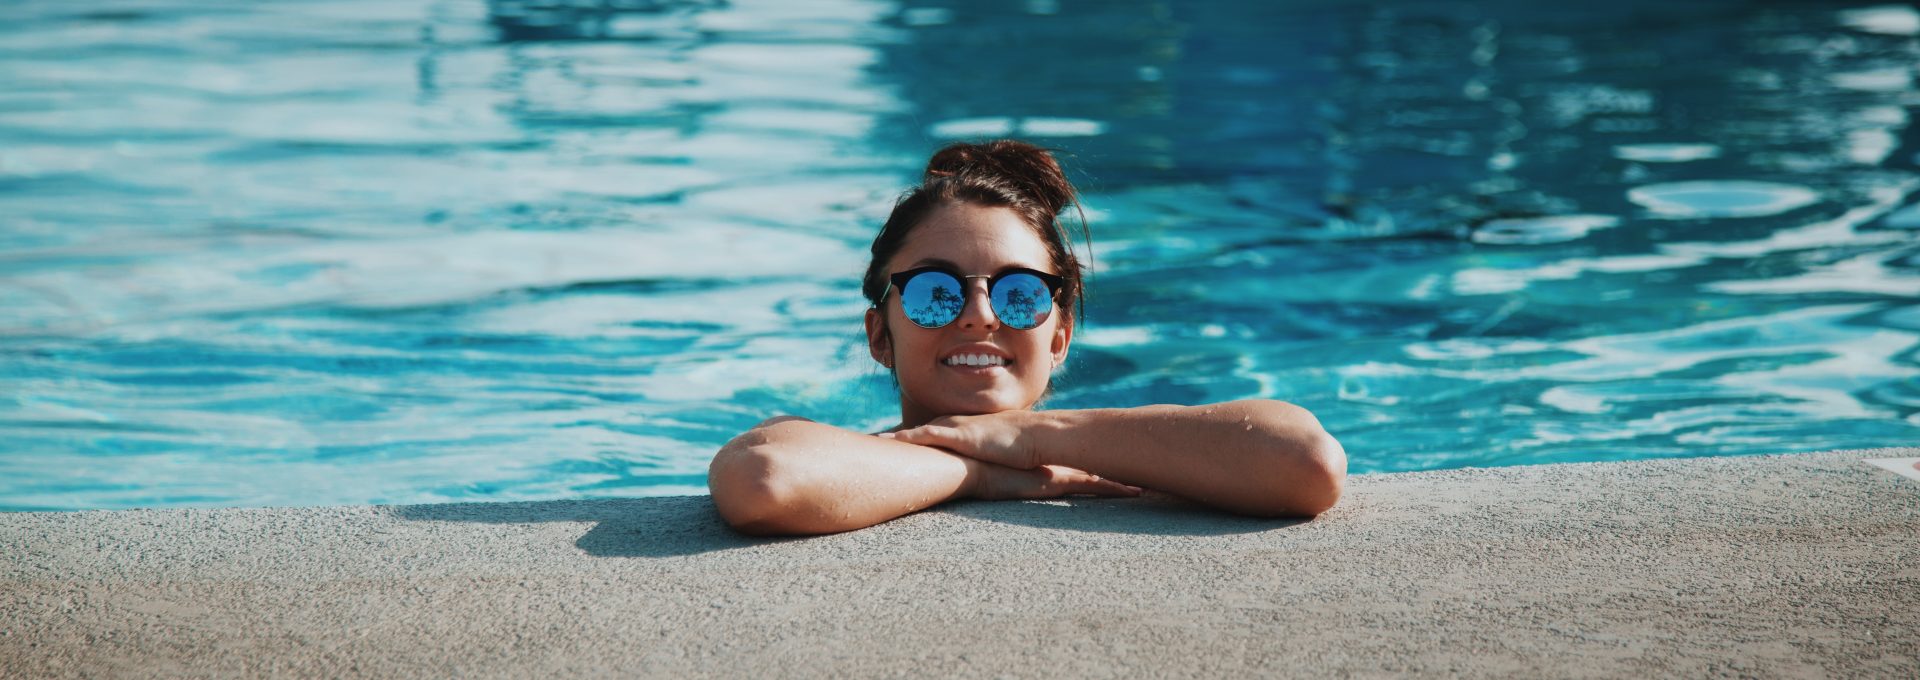 woman wearing sunglasses on swimming pool during daytime